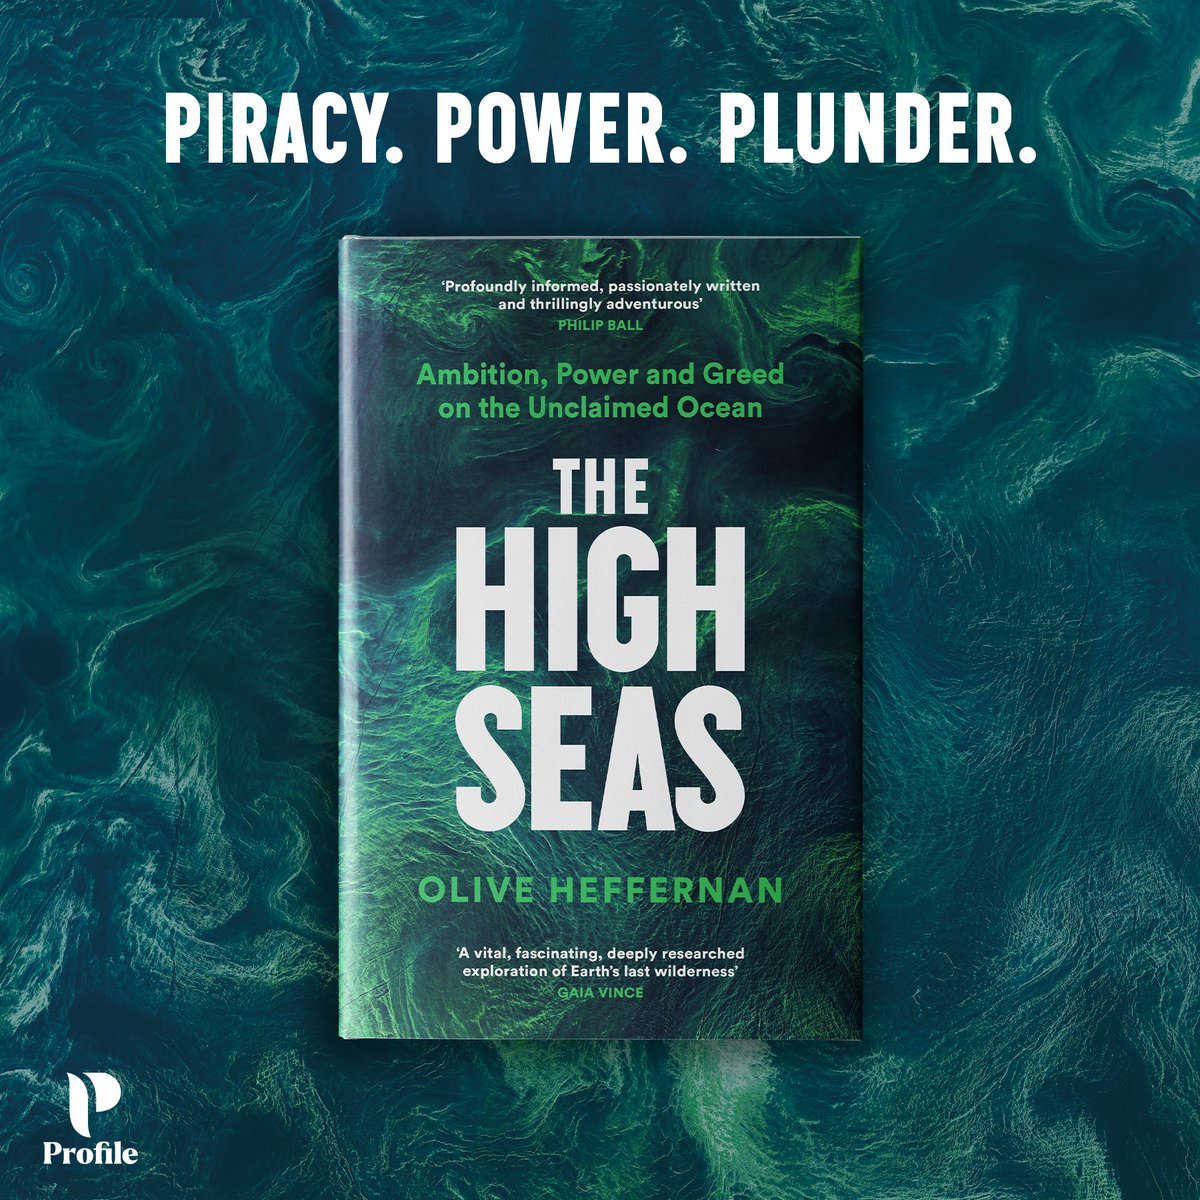 The high seas are home to some of the most biodiverse places on the planet, and to exploitation on a scale few can imagine. #TheHighSeas by Olive Heffernan is out next month, a powerful manifesto calling for the protection of our final frontier. tinyurl.com/38x5p4d2